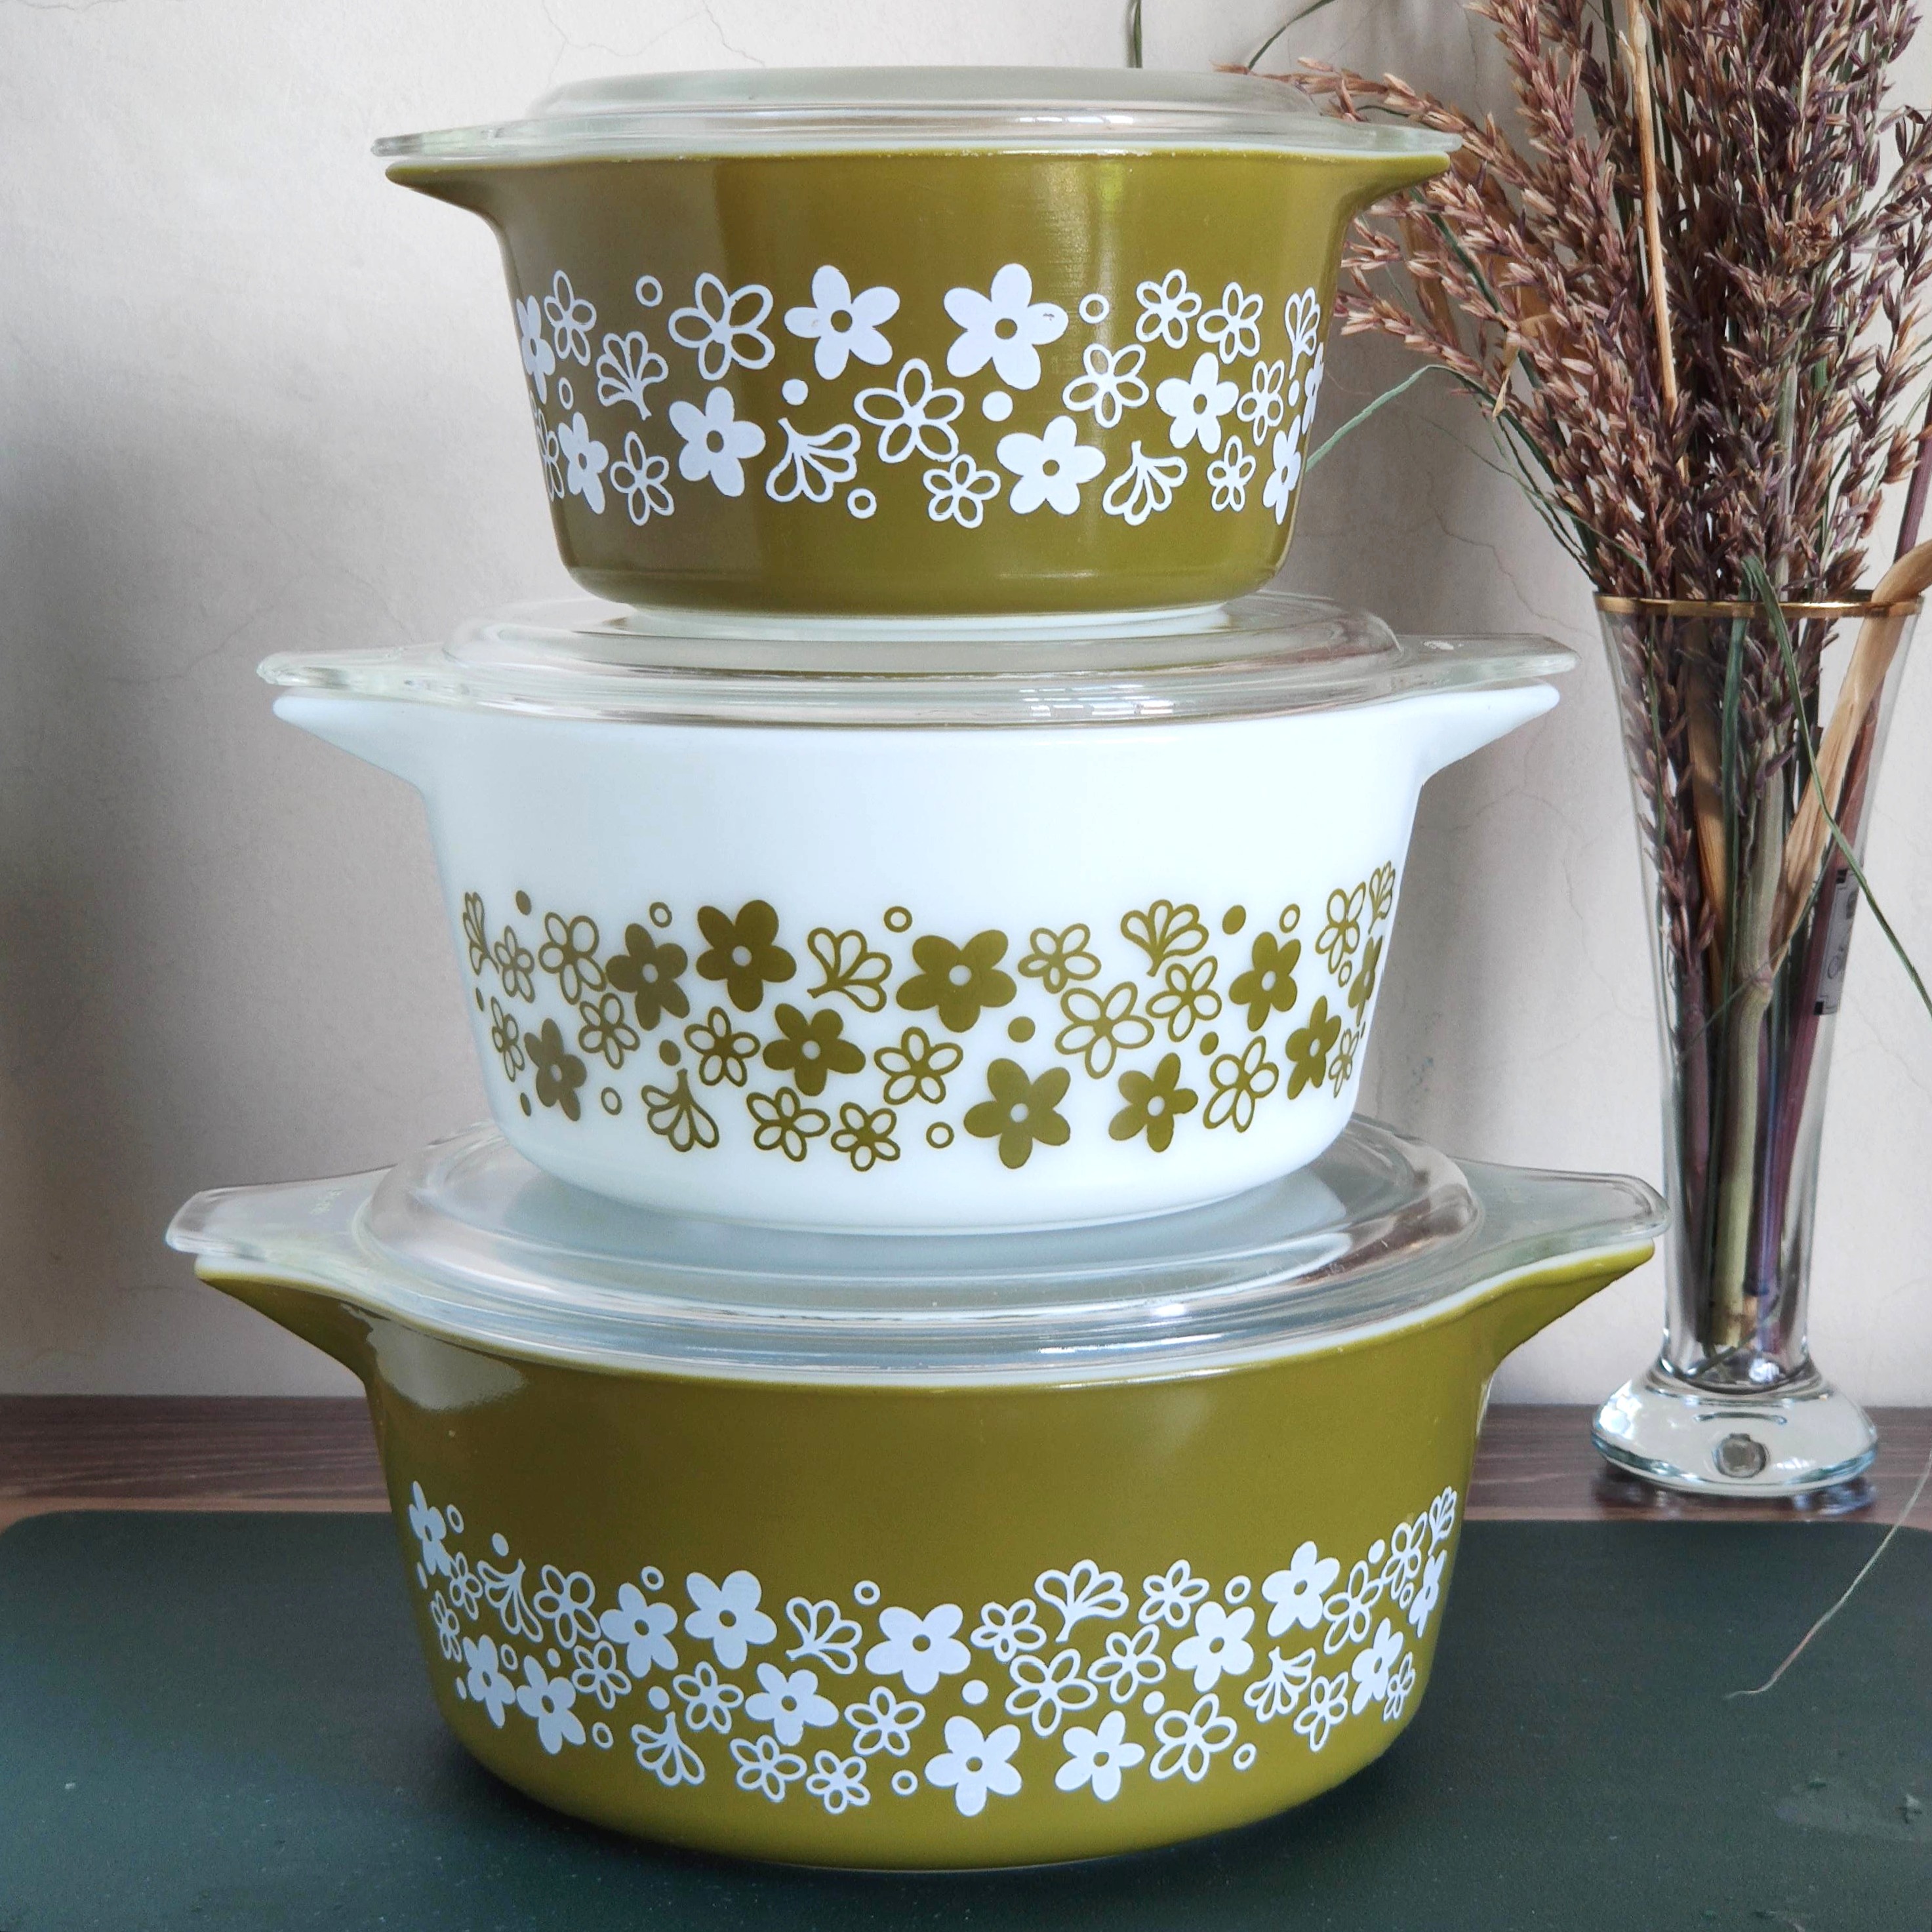 https://media.karousell.com/media/photos/products/2021/8/12/vintage_pyrex_olive_green_and__1628737905_127189c8.jpg